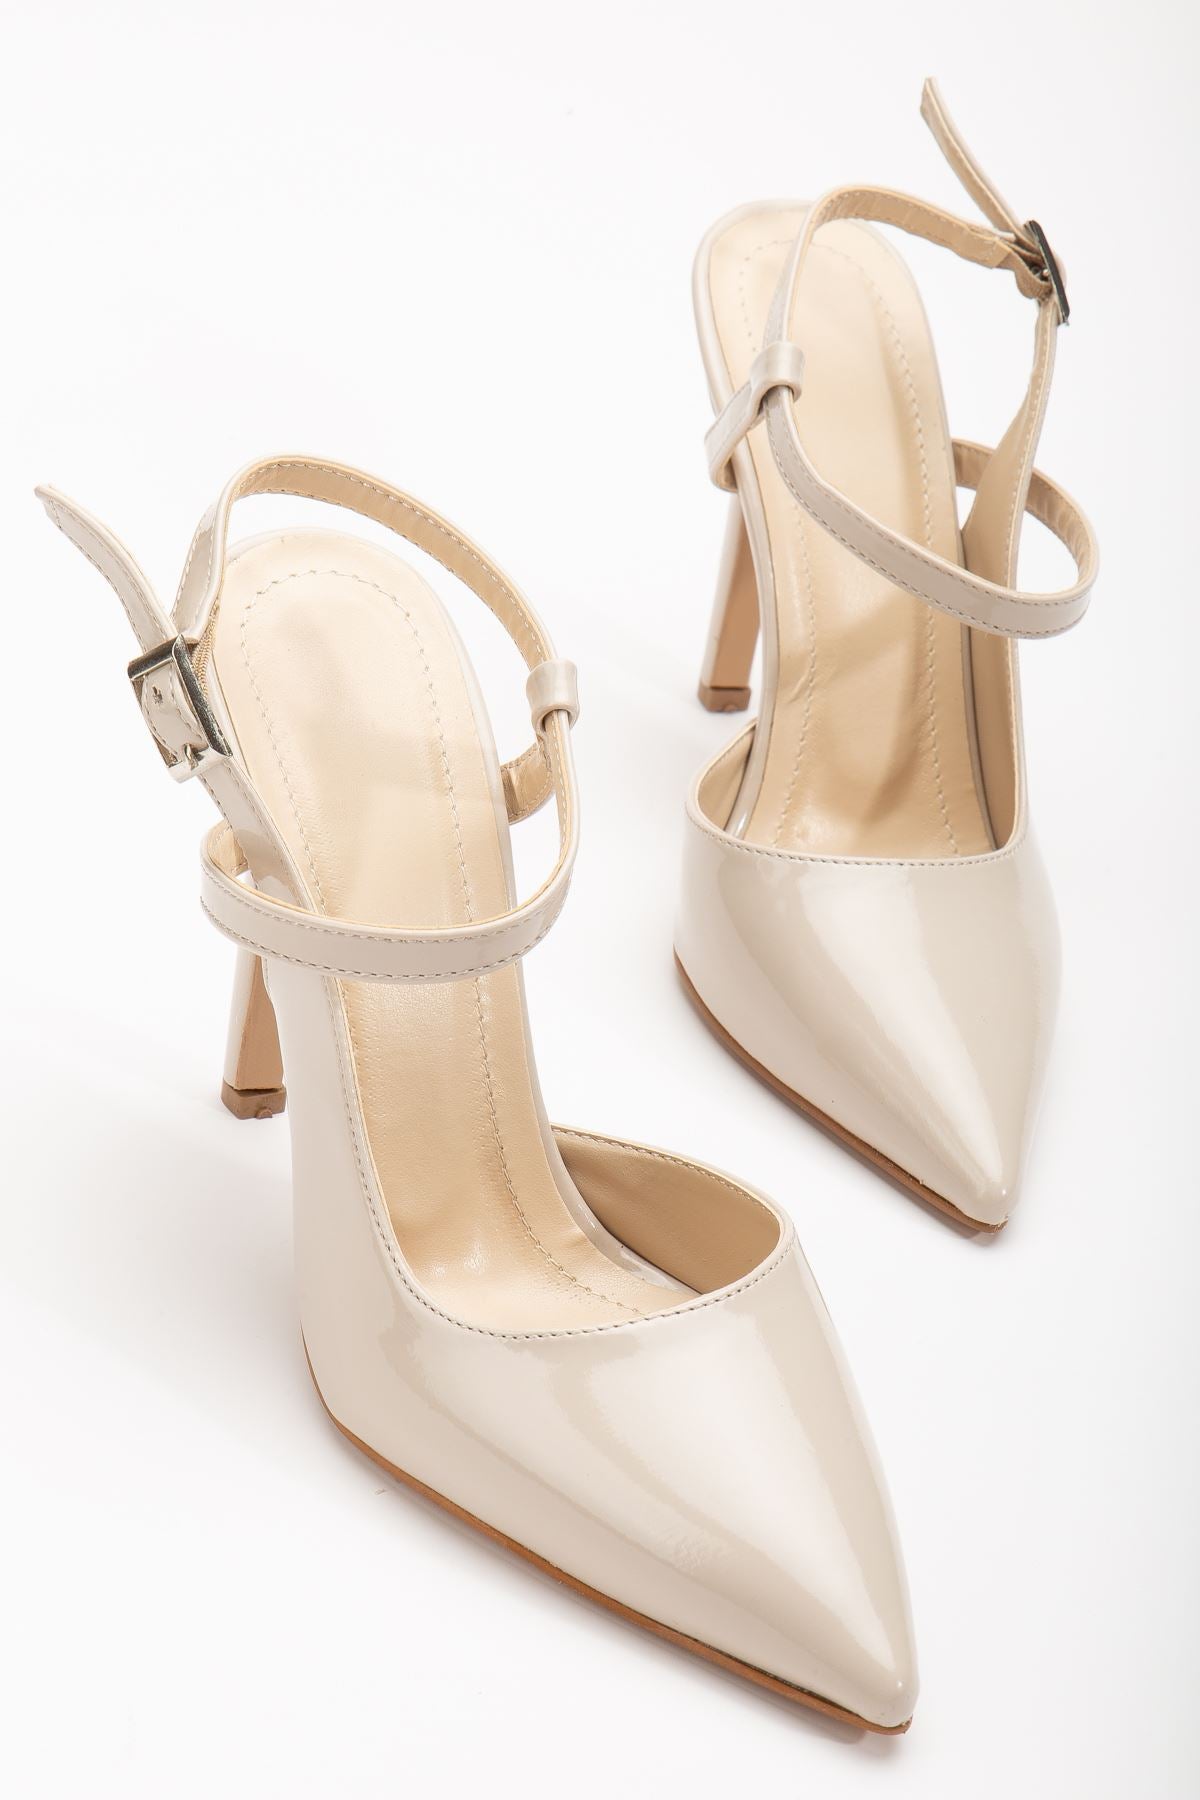 Nely Beige Patent Leather Pointed Women's Heeled Shoes - STREETMODE™